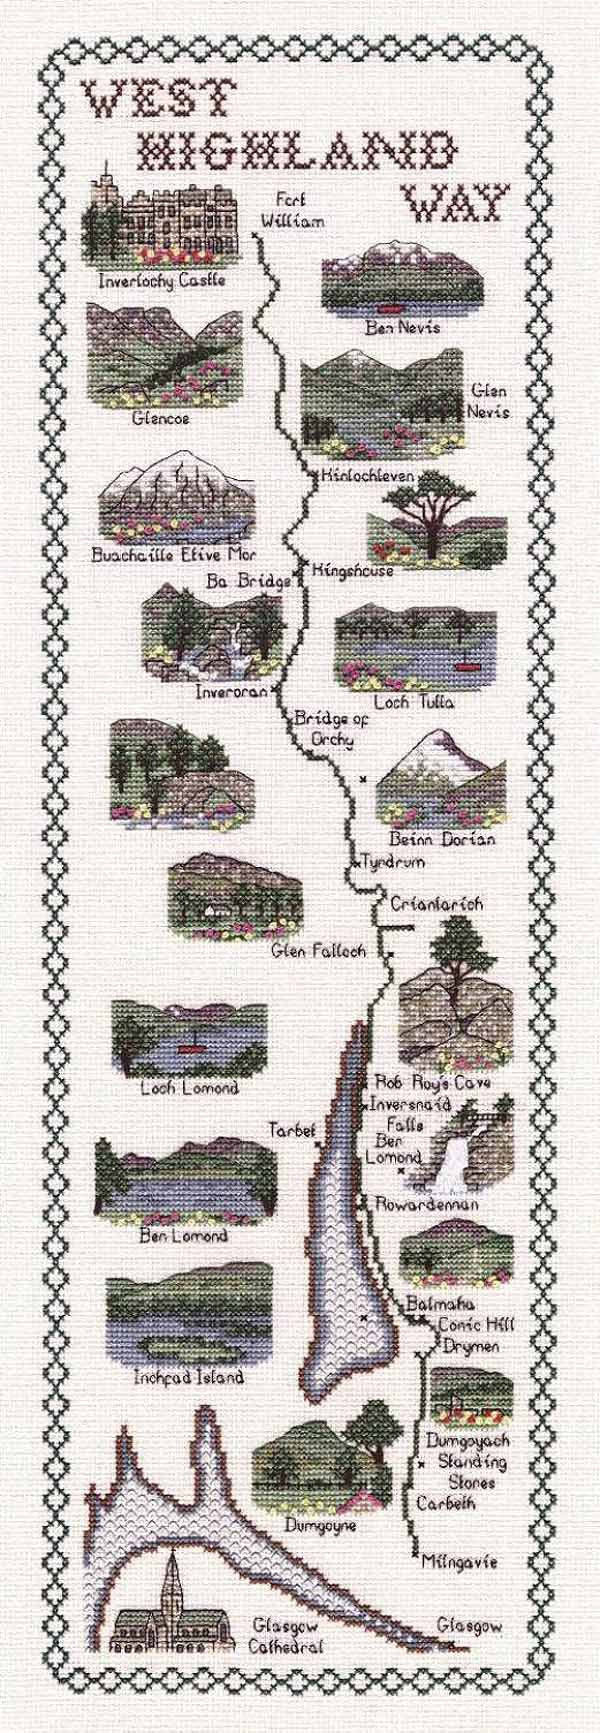 West Highland Way Map Cross Stitch Kit by Classic Embroidery